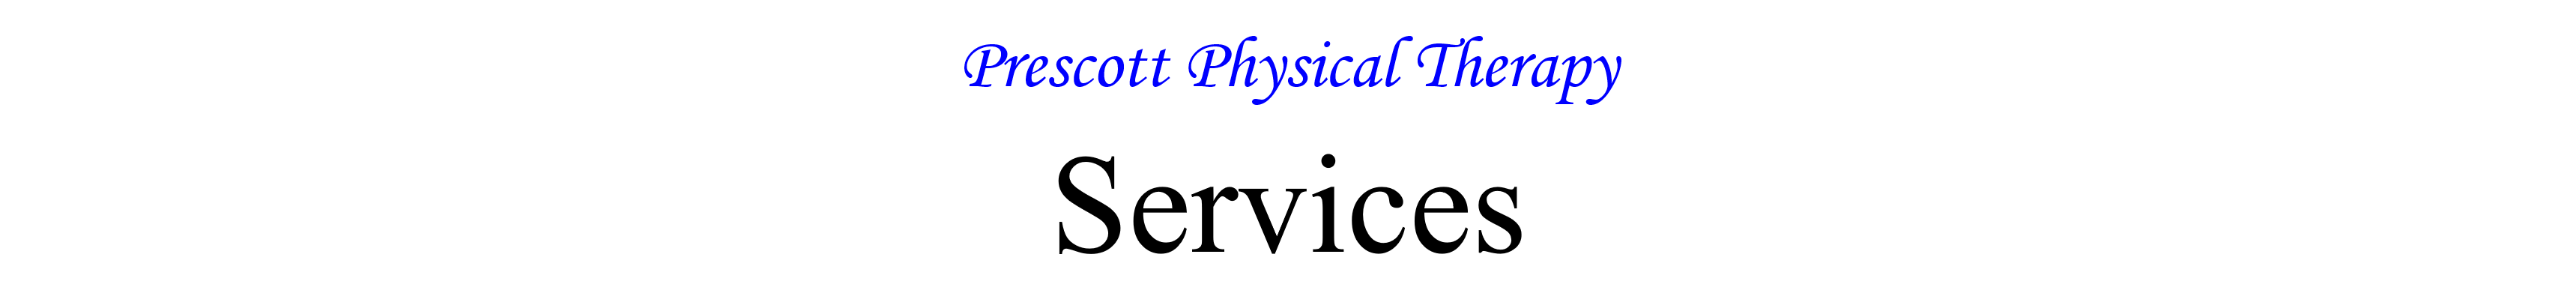 Prescott Physical Therapy